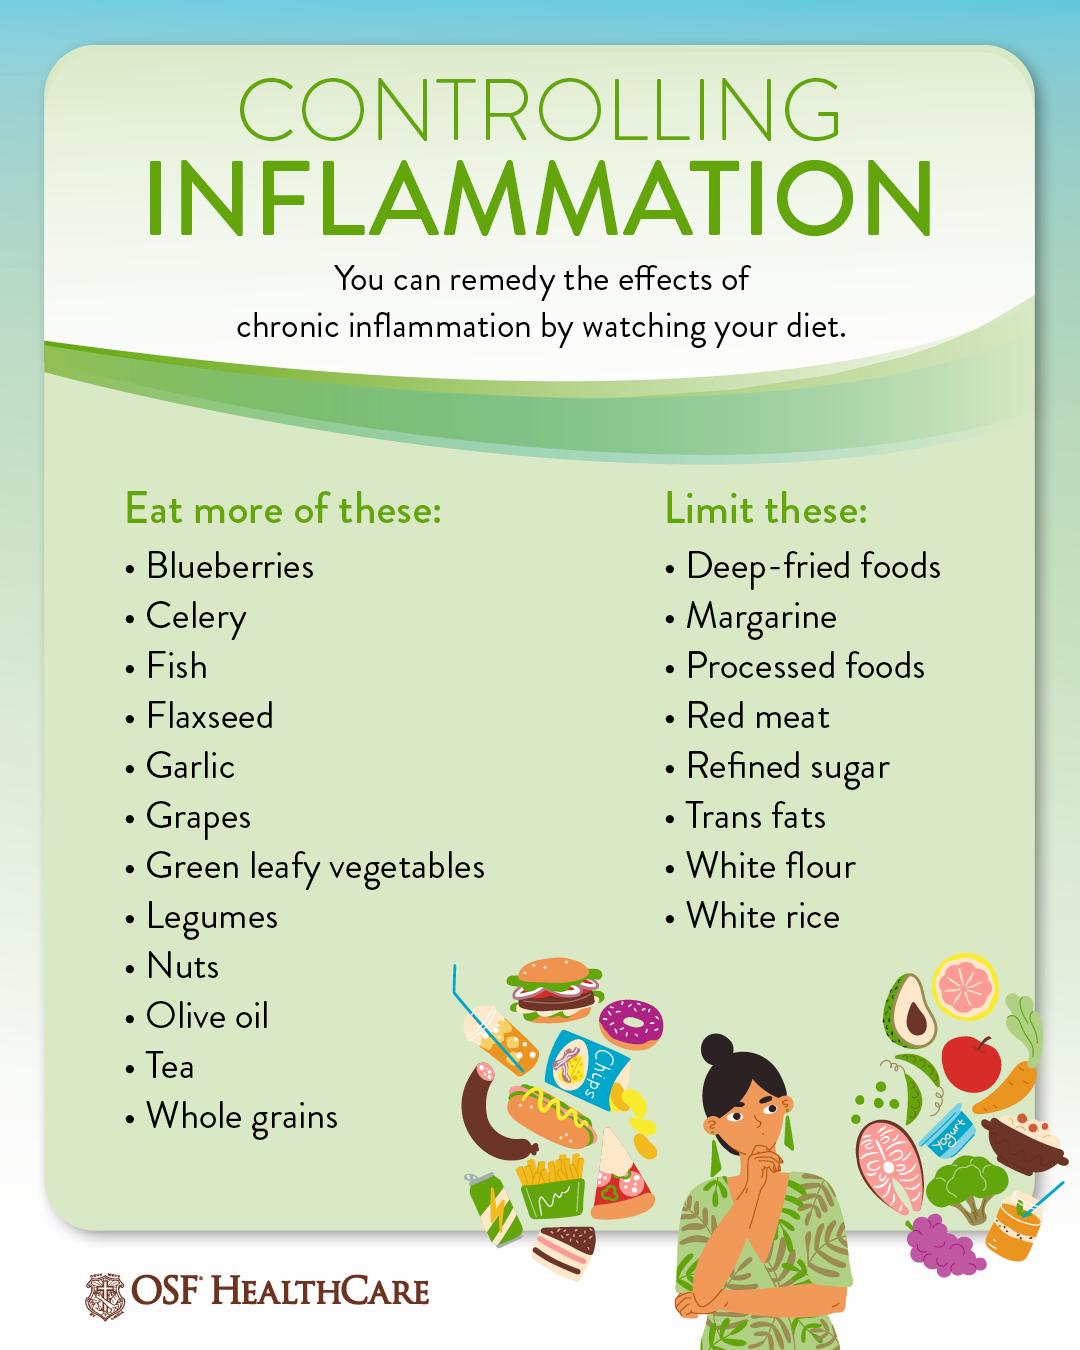 A woman ponders a graphic that shows foods to eat more of and foods to limit to control inflammation.